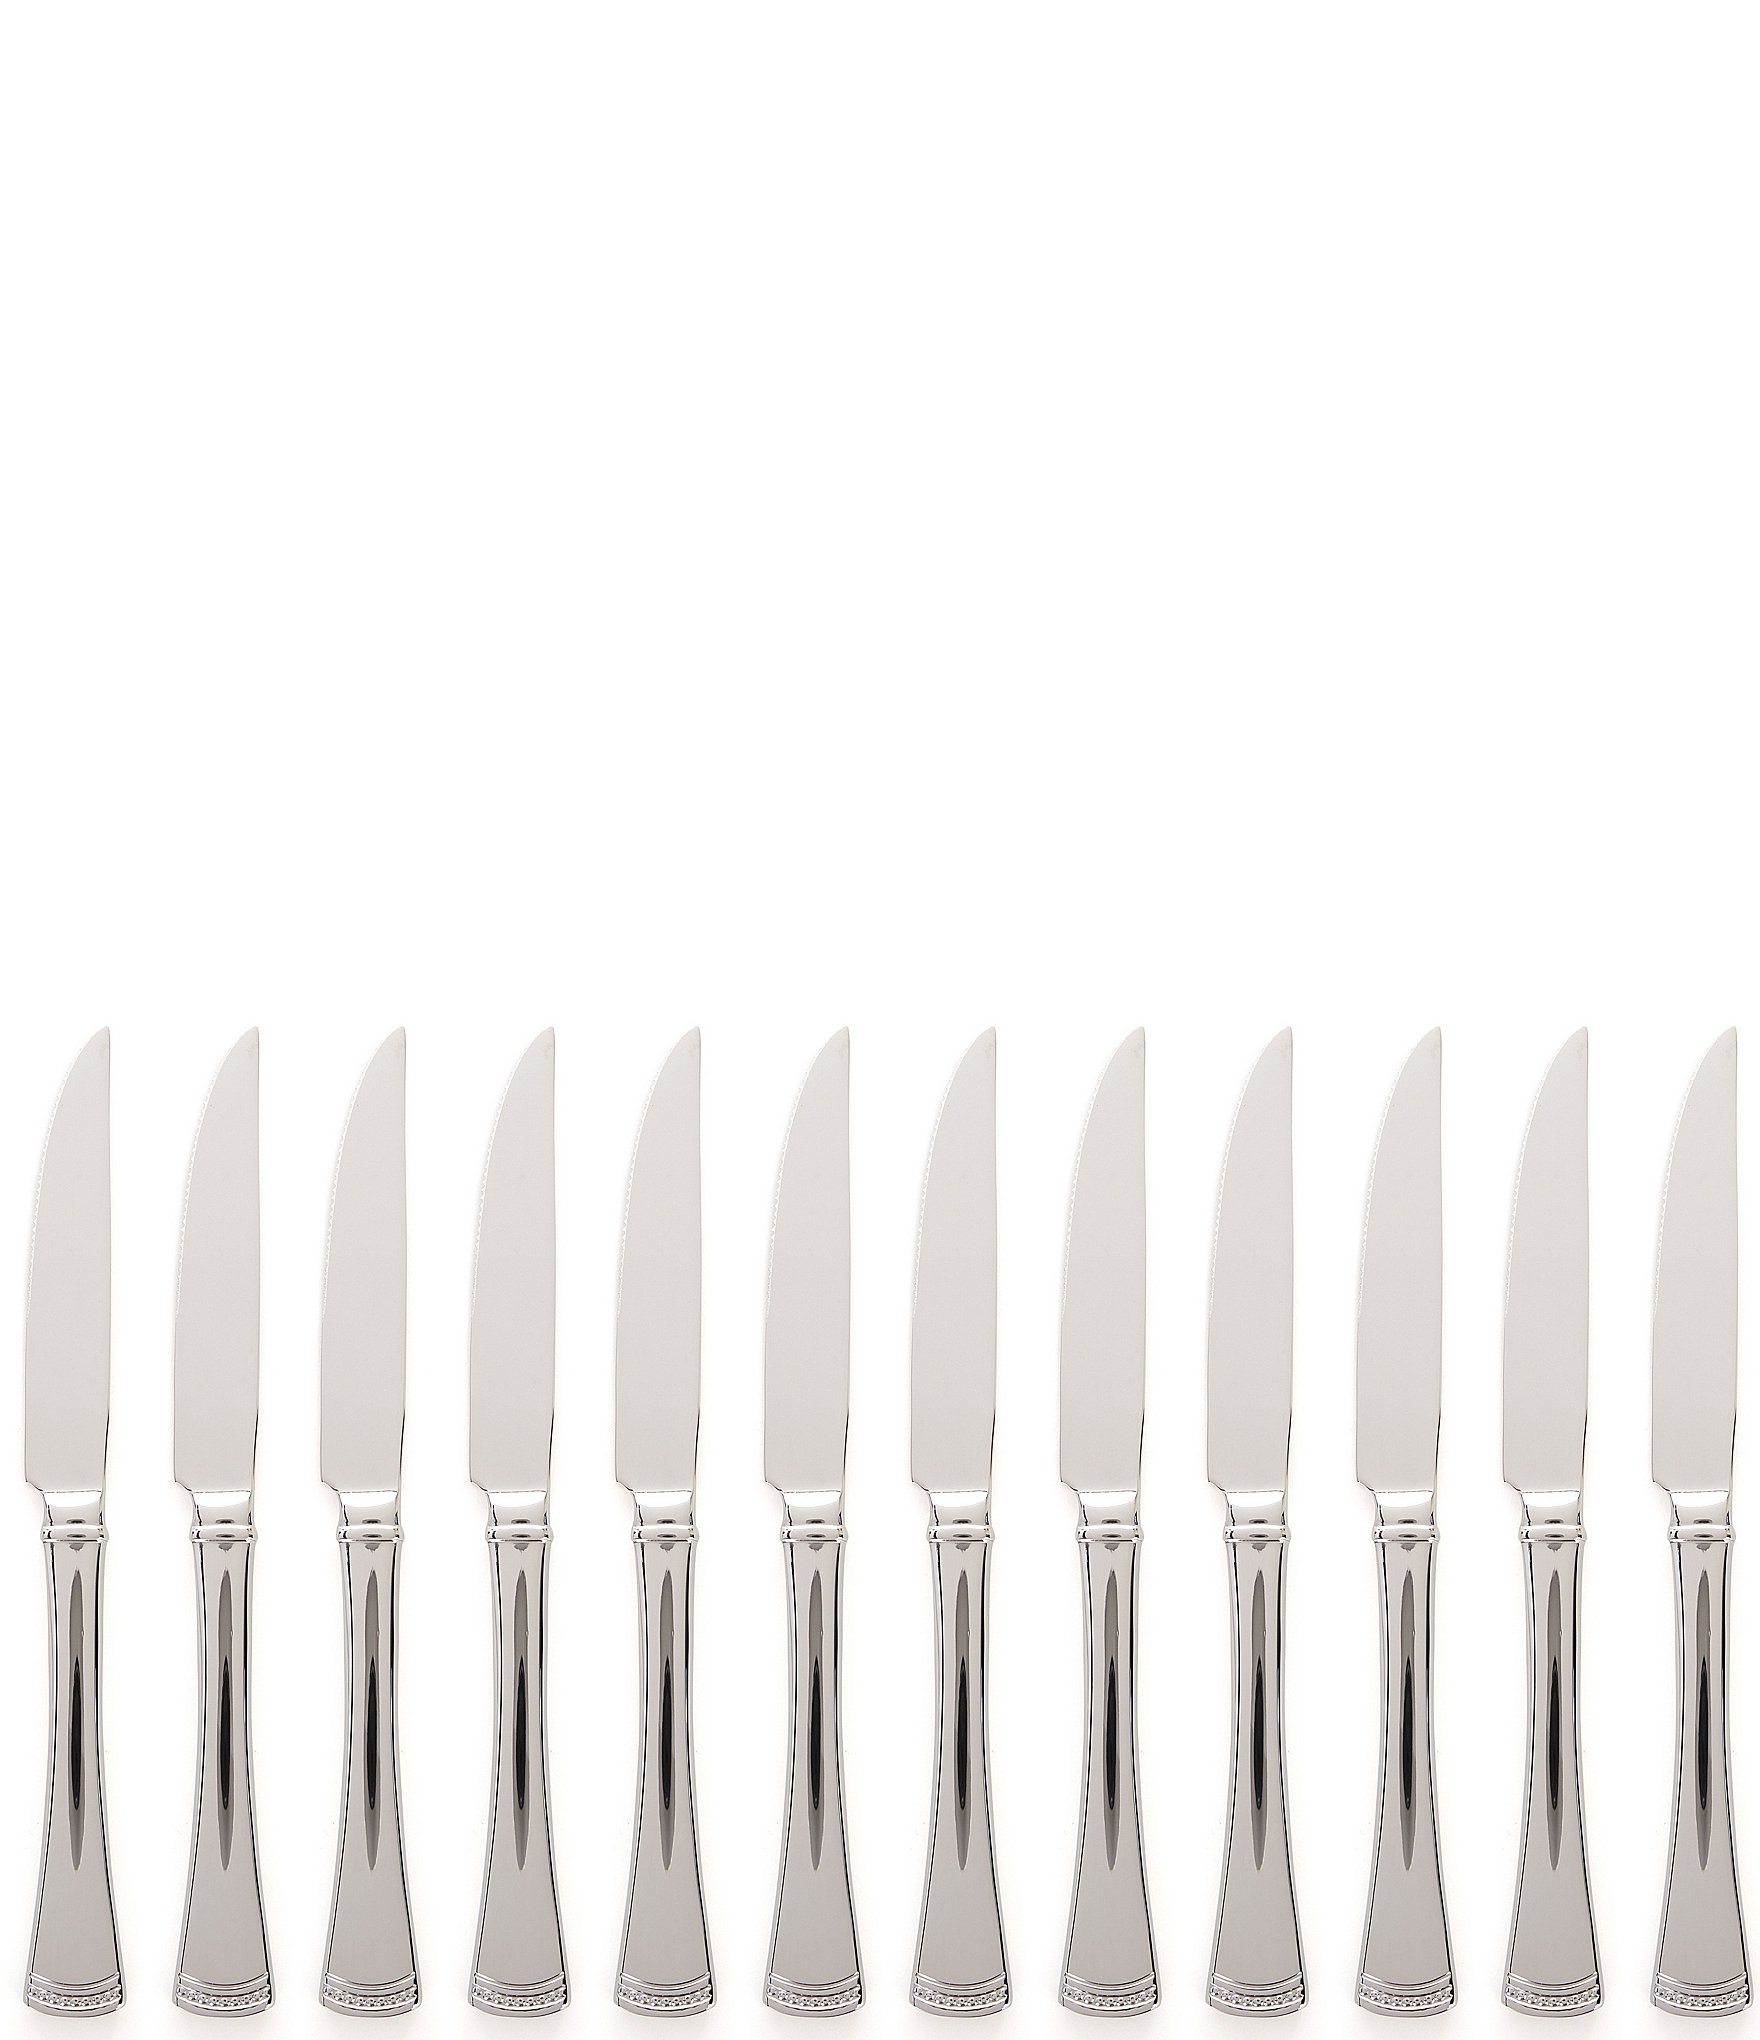 Buy 19 pc set- 12 pc set plus steak knives, order today and get a